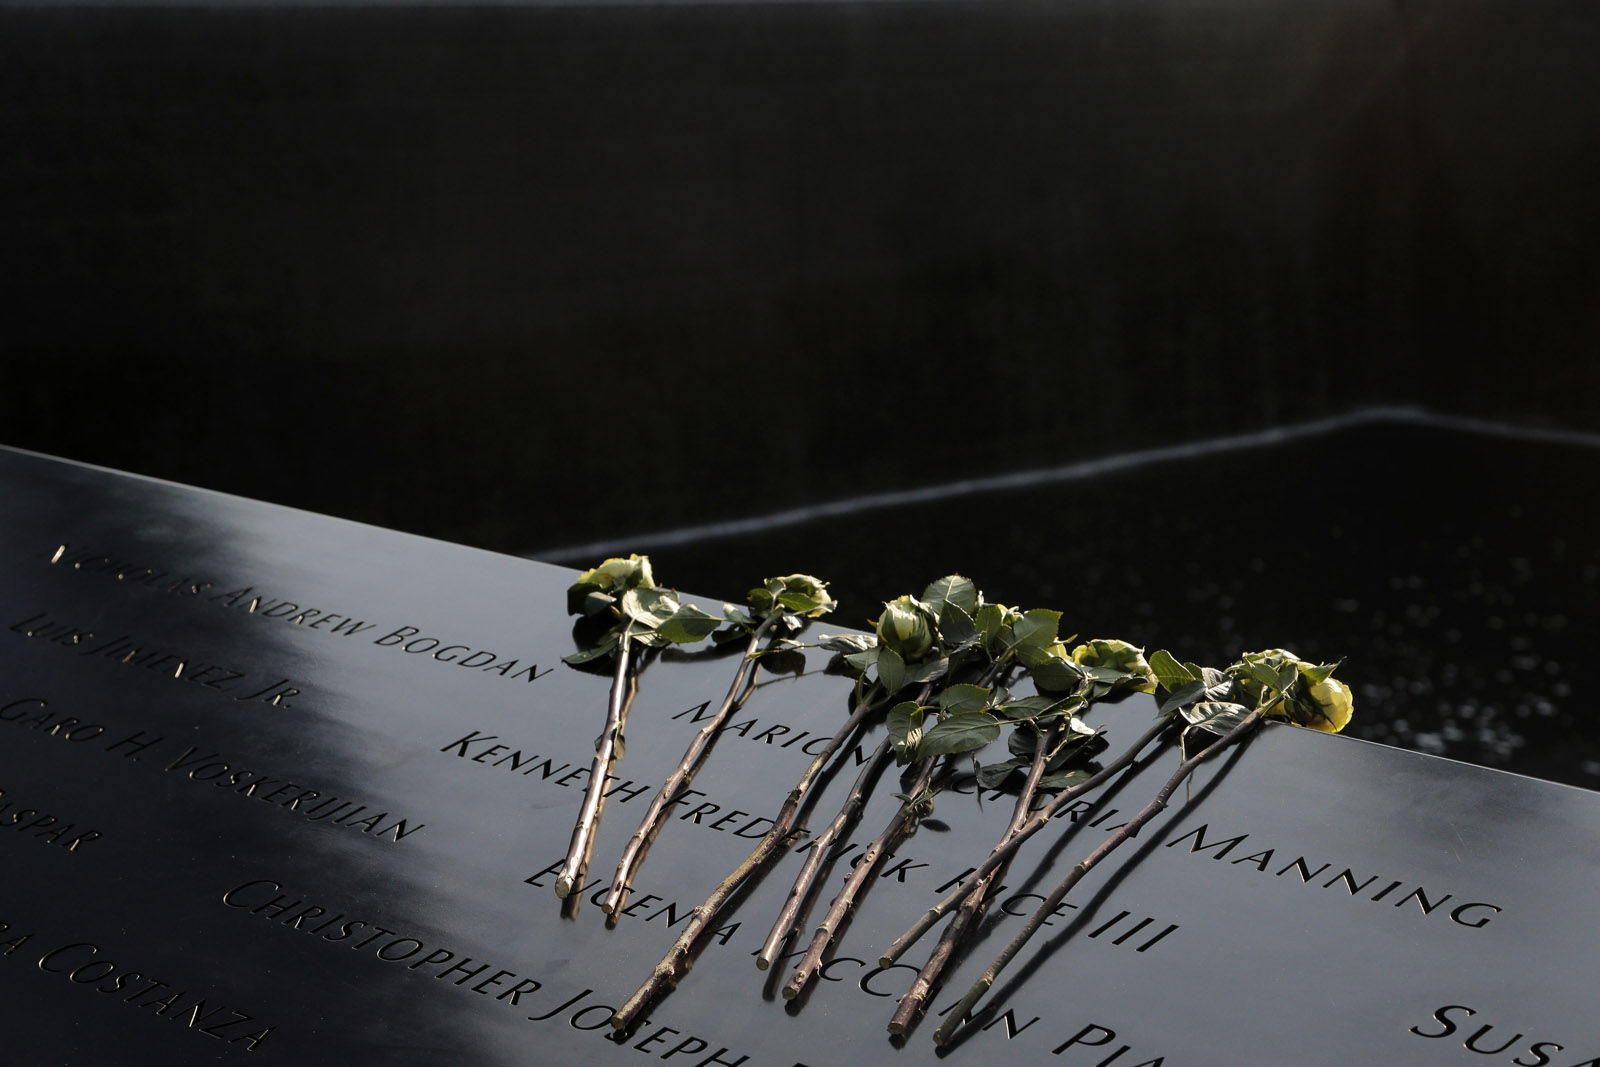 Flowers lay over the names of the victims of the 9/11 terrorist attacks before a ceremony at ground zero in New York, Monday, Sept. 11, 2017. Holding photos and reading names of loved ones lost 16 years ago, 9/11 victims' relatives marked the anniversary of the attacks at ground zero on Monday with a solemn and personal ceremony. (AP Photo/Seth Wenig)